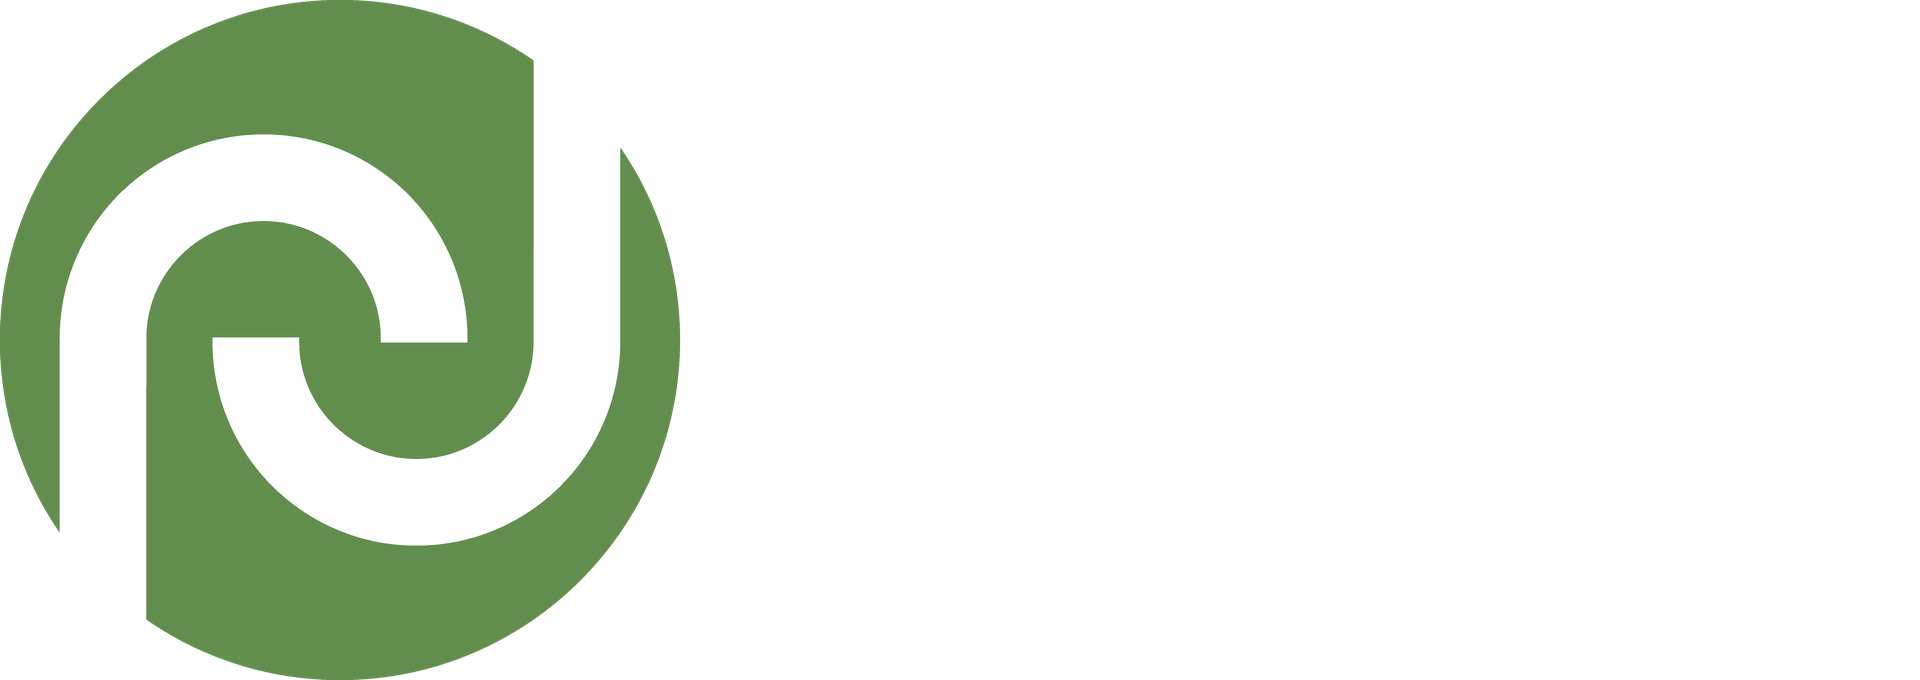 Equipment Recycling System